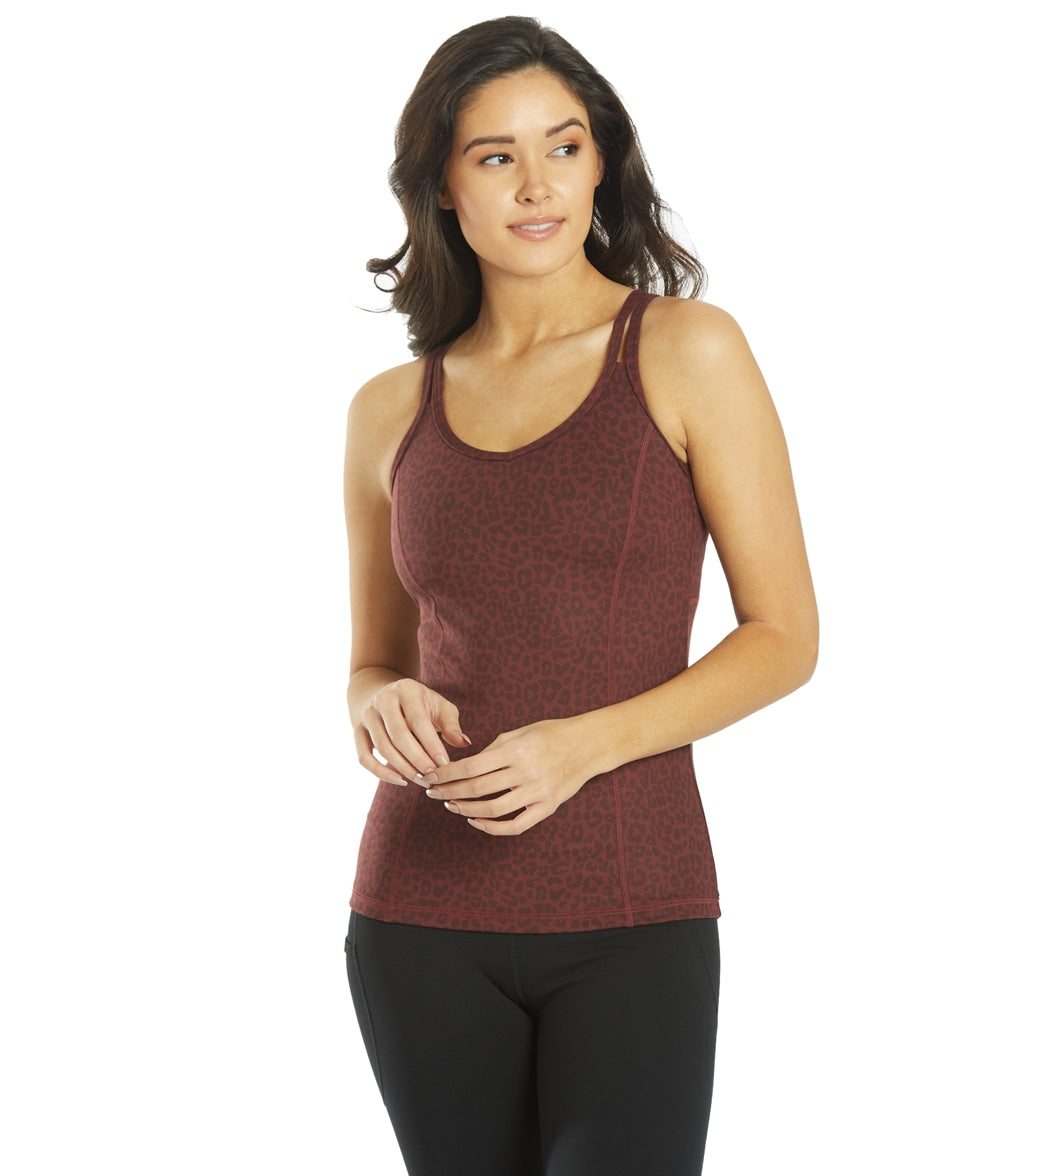 Everyday Yoga Radiant Cheetah Strappy Back Support Tank at YogaOutlet.com –